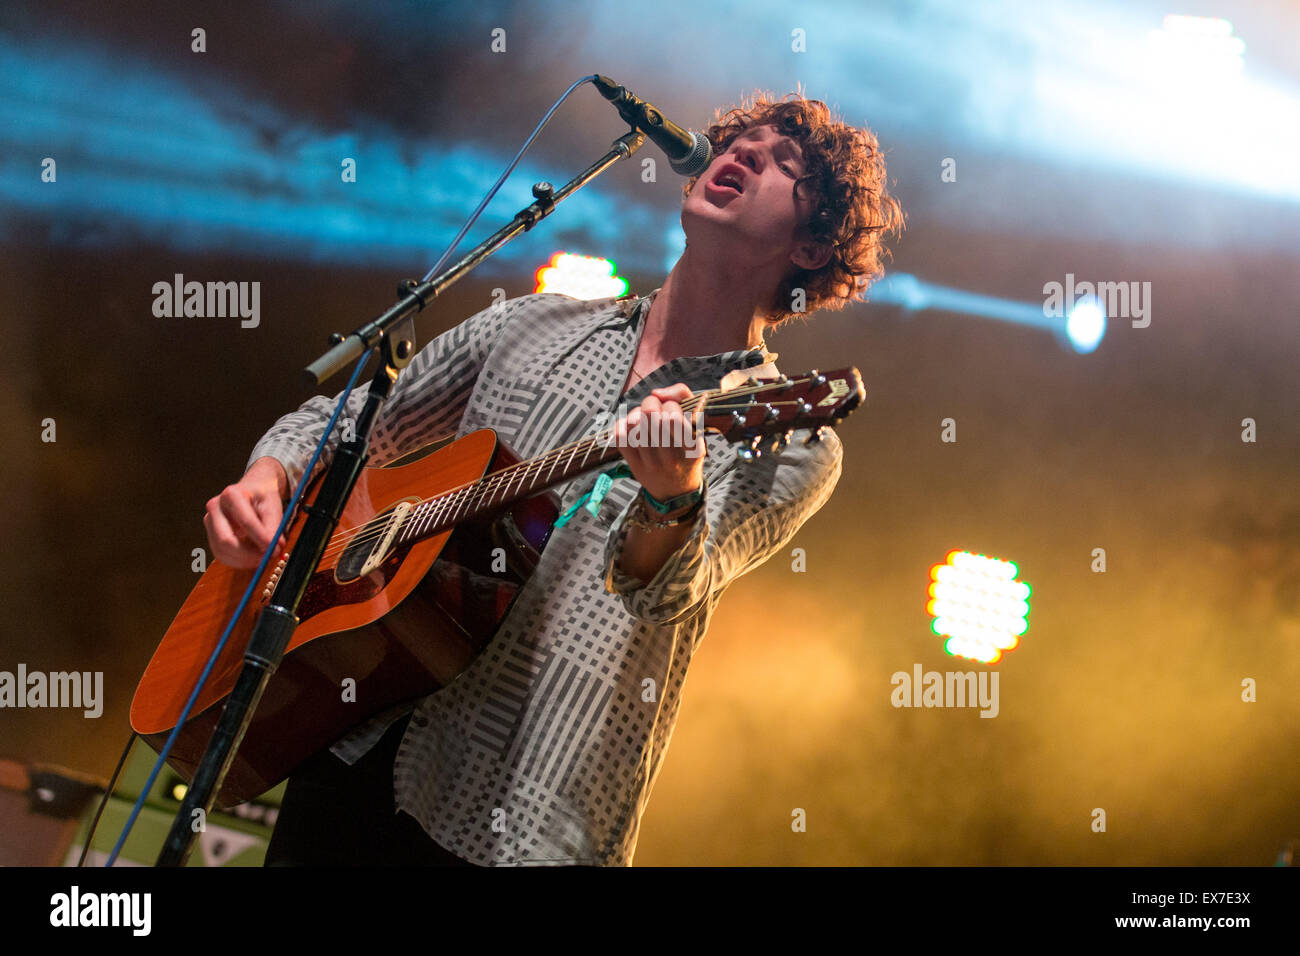 Dover, Deleware, USA. 18th June, 2015. Musician LUKE PRITCHARD of The Kooks performs live on stage at the Firefly Music Festival in Dover, Delaware © Daniel DeSlover/ZUMA Wire/Alamy Live News Stock Photo